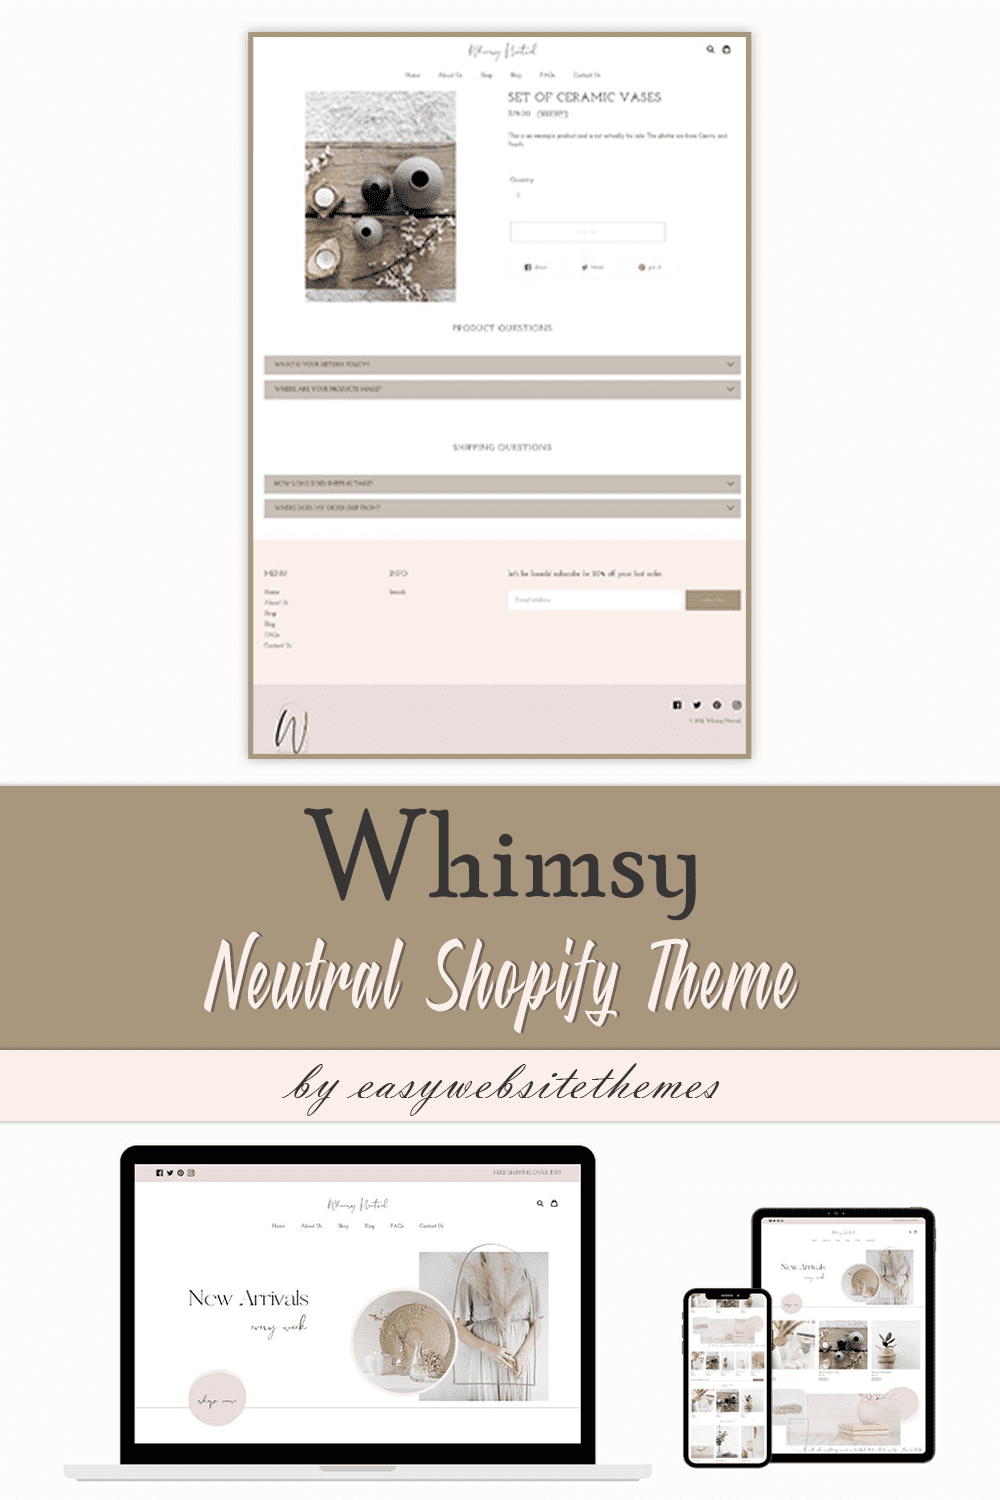 Neutral Shopify Theme | Whimsy - pinterest image preview.